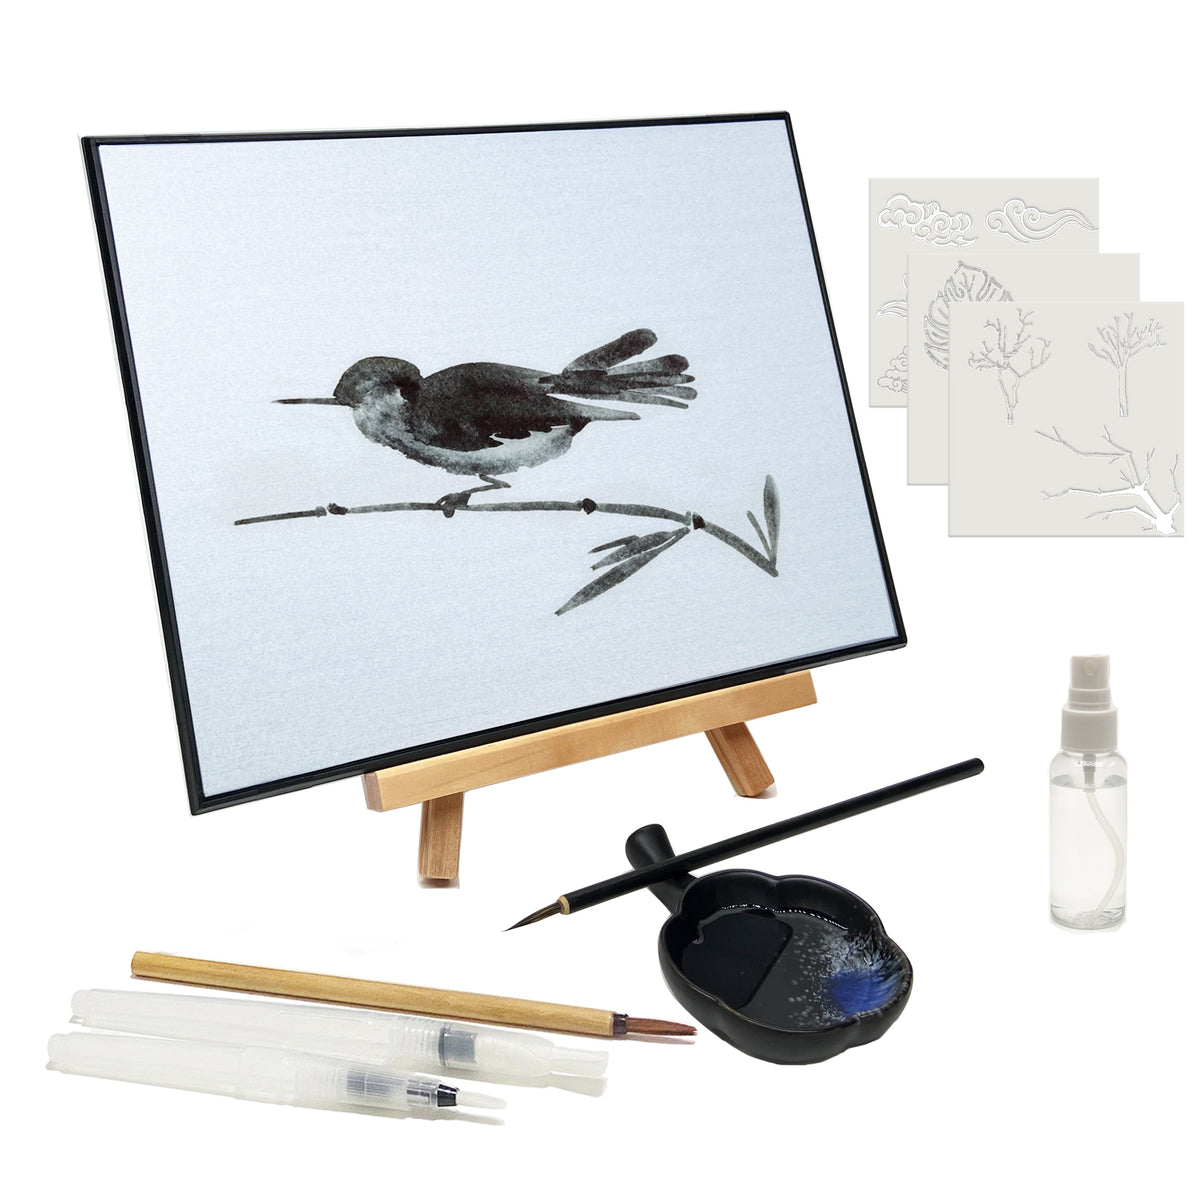  Meditation Gifts Buddha Drawing Board - Woman Relaxation Gifts  Man Zen Gifts Zen Decor Office Home Zen Garden Relaxing Art Water Painting  Board Unique Stress Relief Birthday Gifts for Adults Him